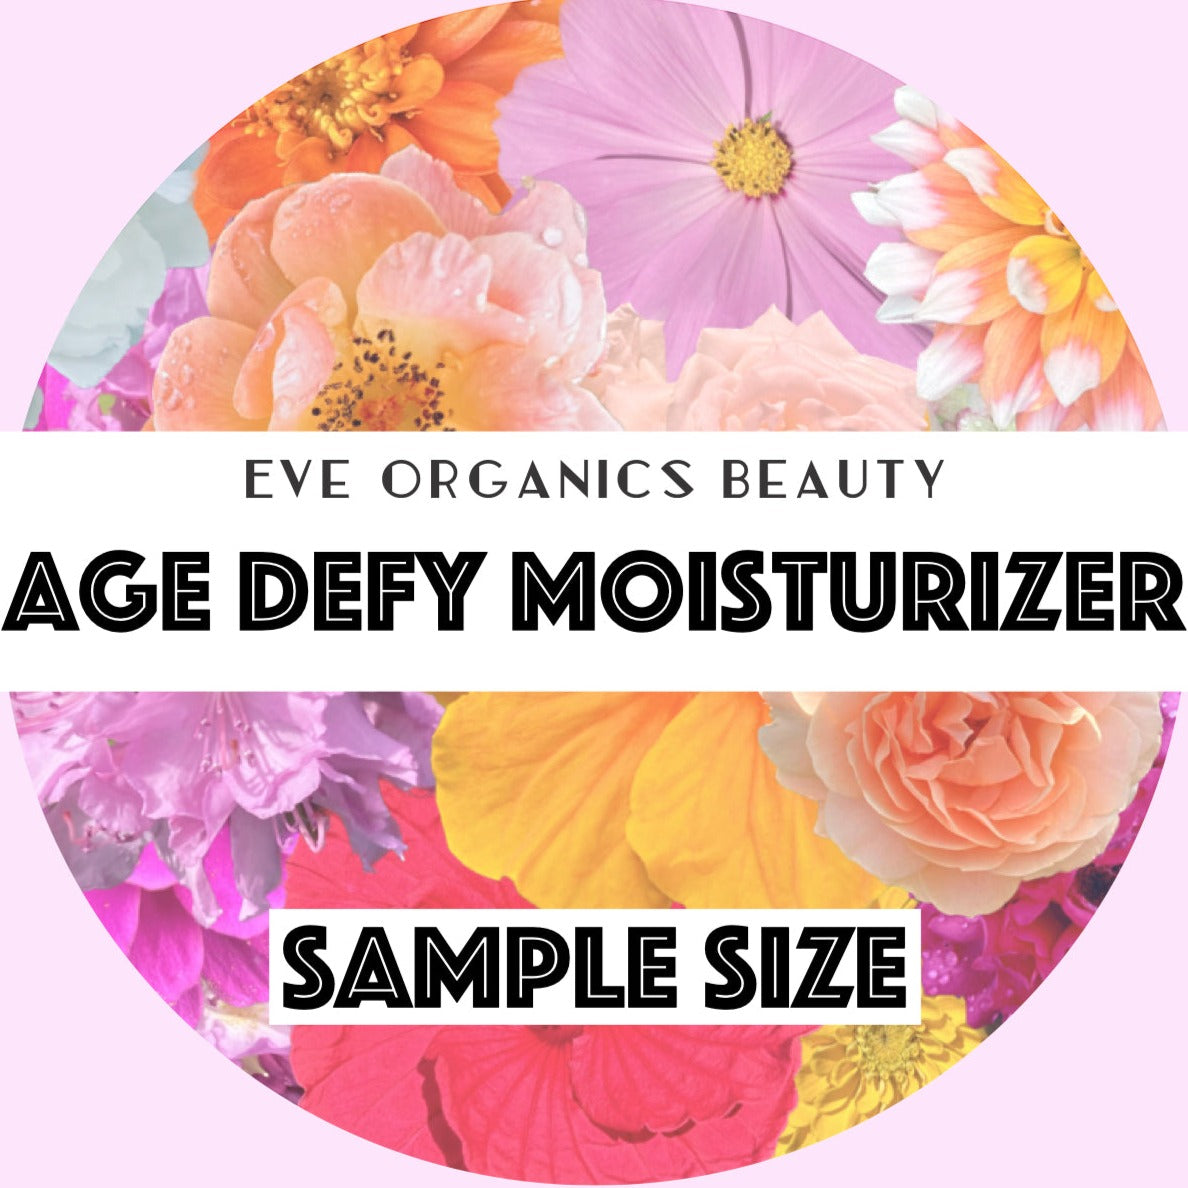 ABSOLUTE AGE DEFY MOISTURIZER SAMPLE SIZE, ALL SKIN TYPES